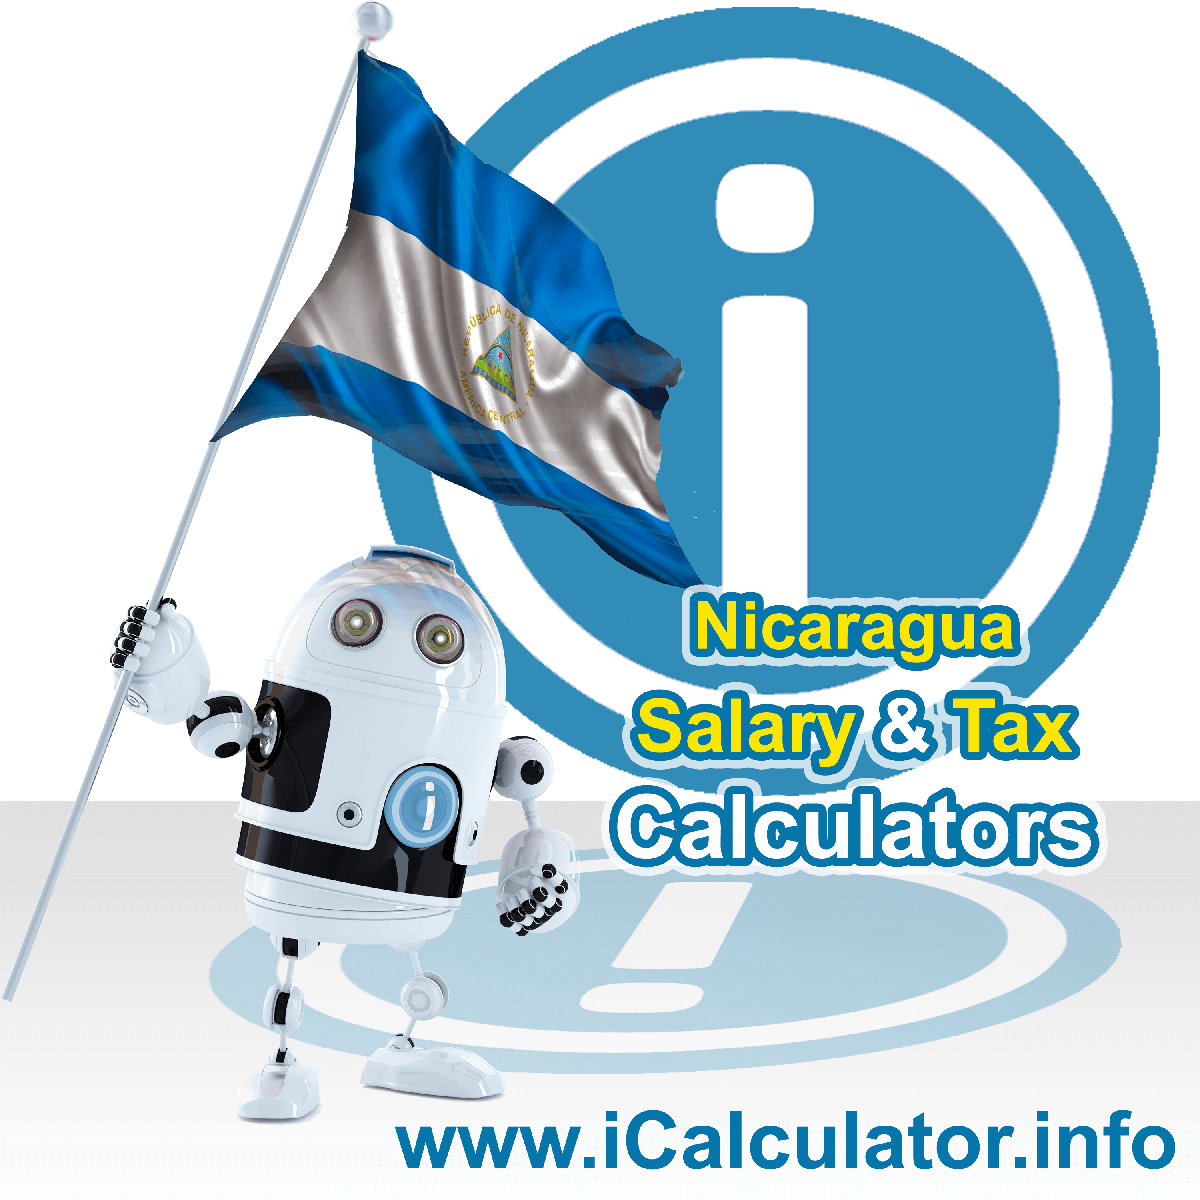 Nicaragua Salary Calculator. This image shows the Nicaraguaese flag and information relating to the tax formula for the Nicaragua Tax Calculator